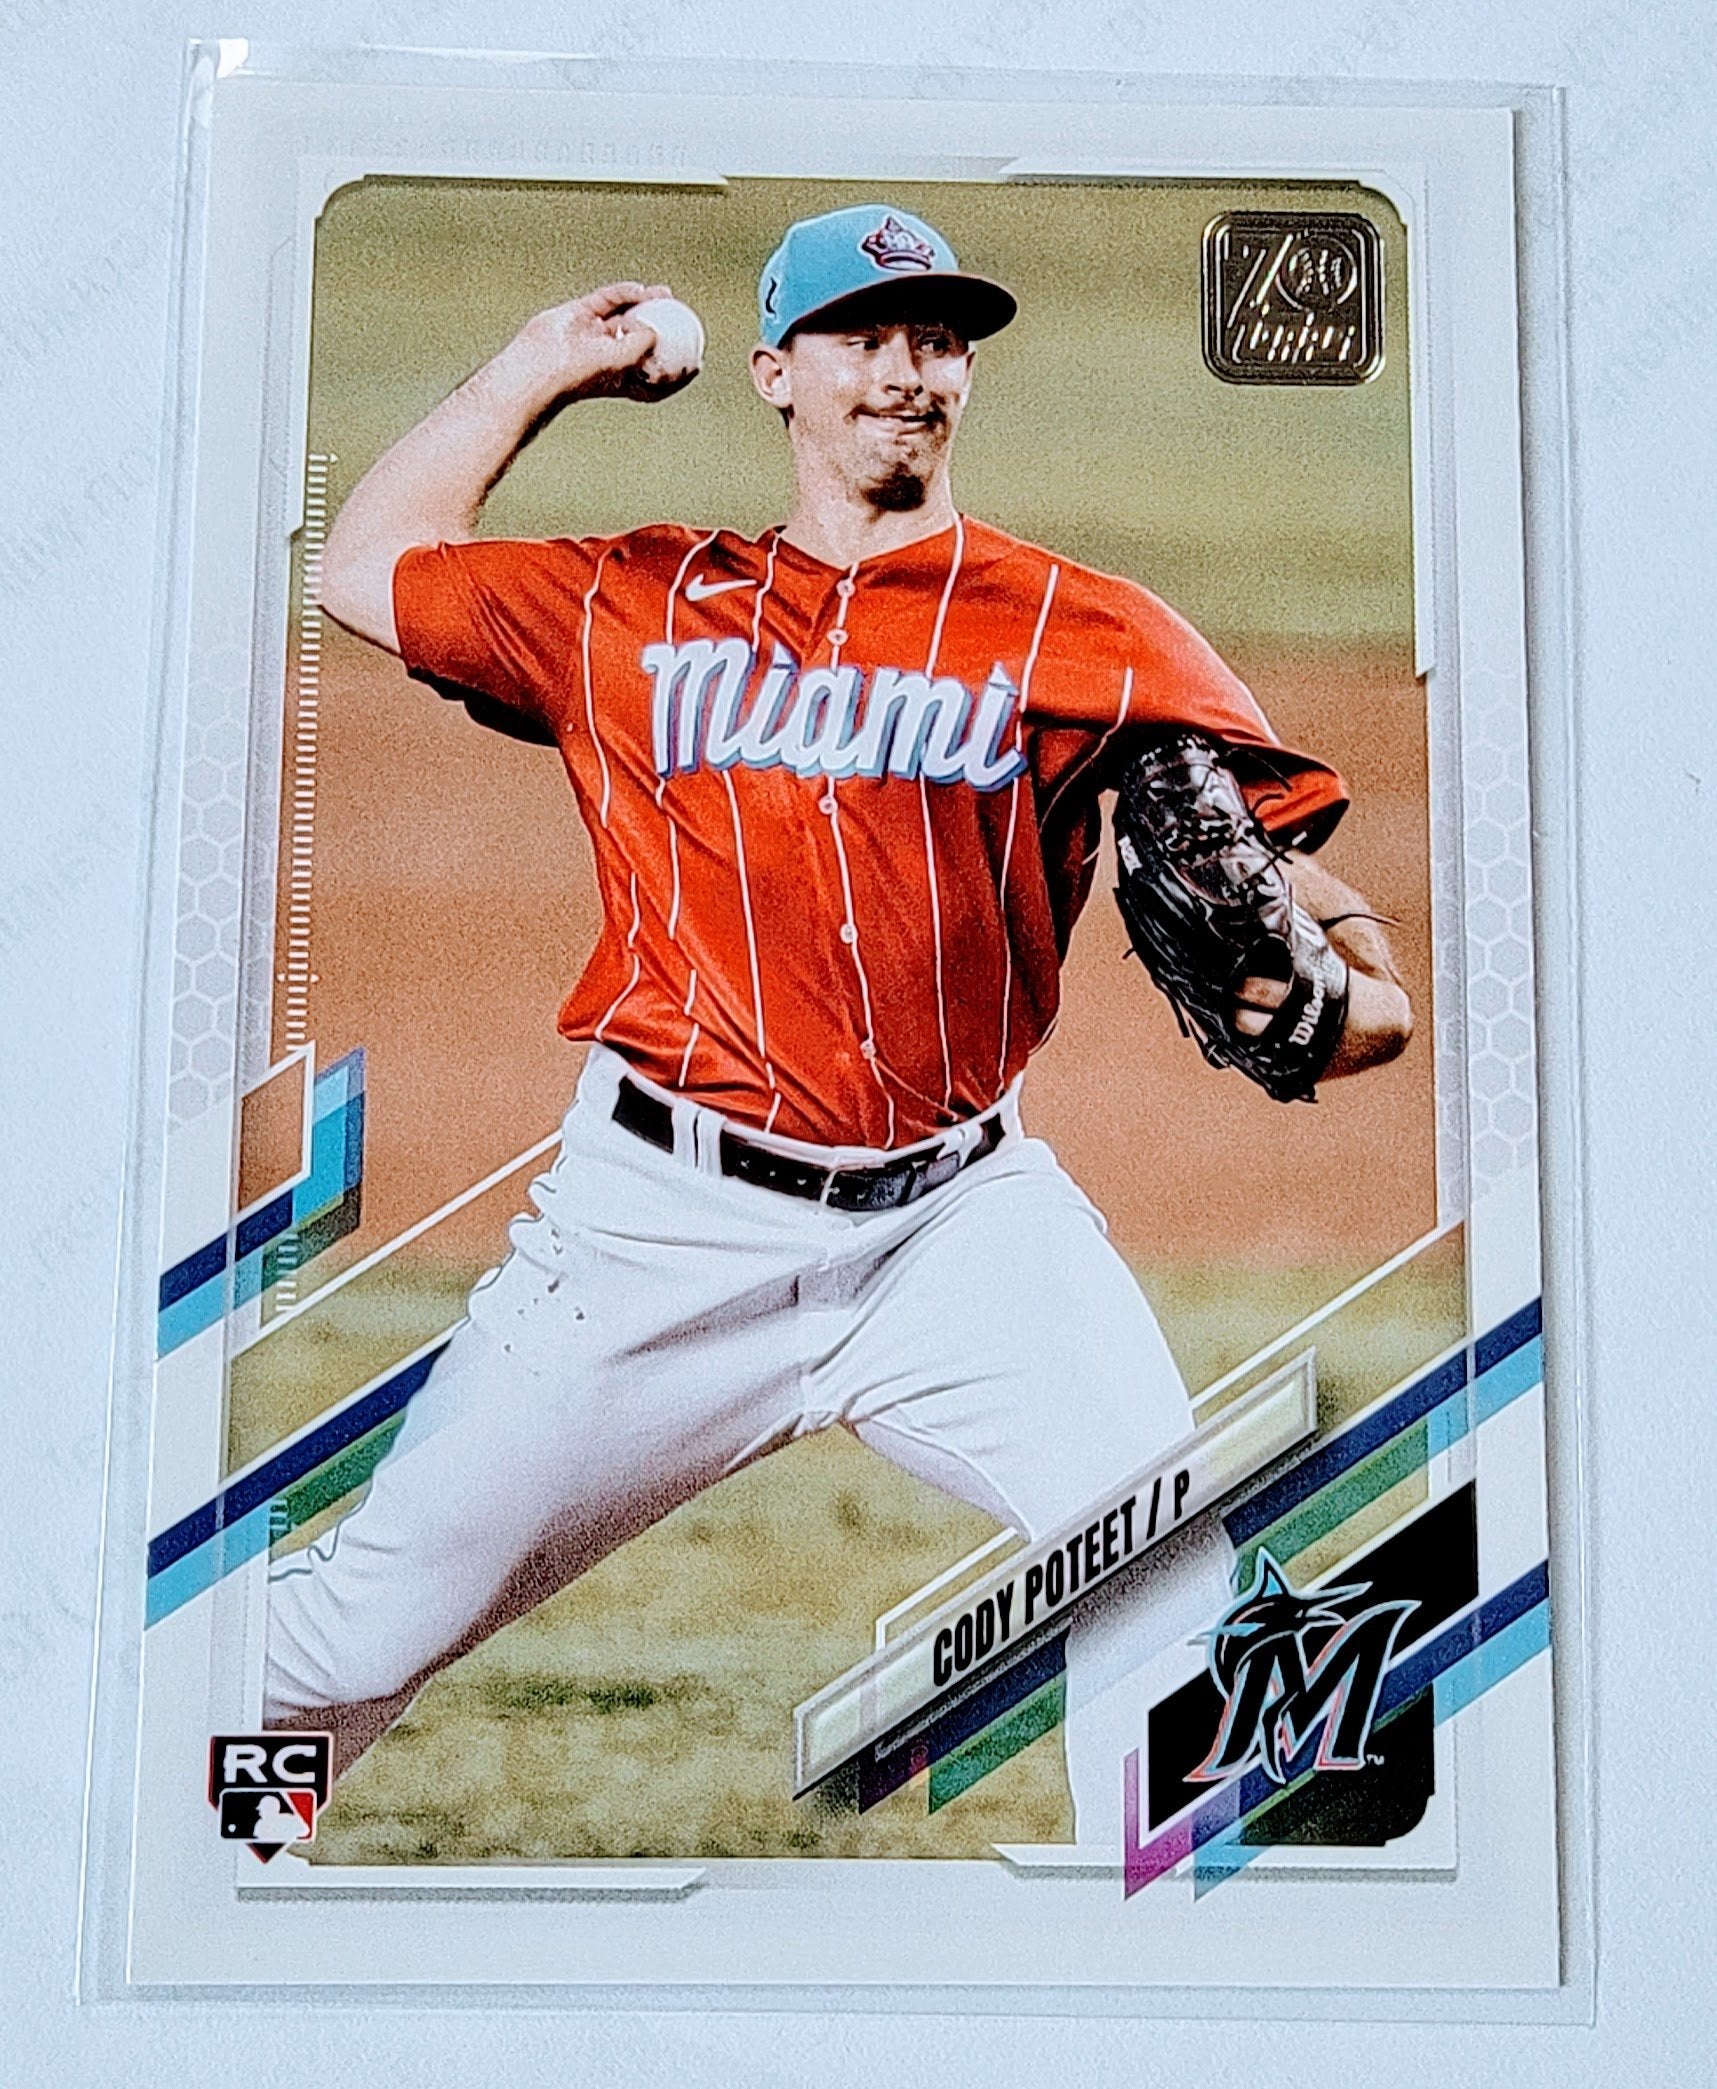 2021 Topps Update Cody Poteet Rookie Baseball Trading Card SMCB1 simple Xclusive Collectibles   